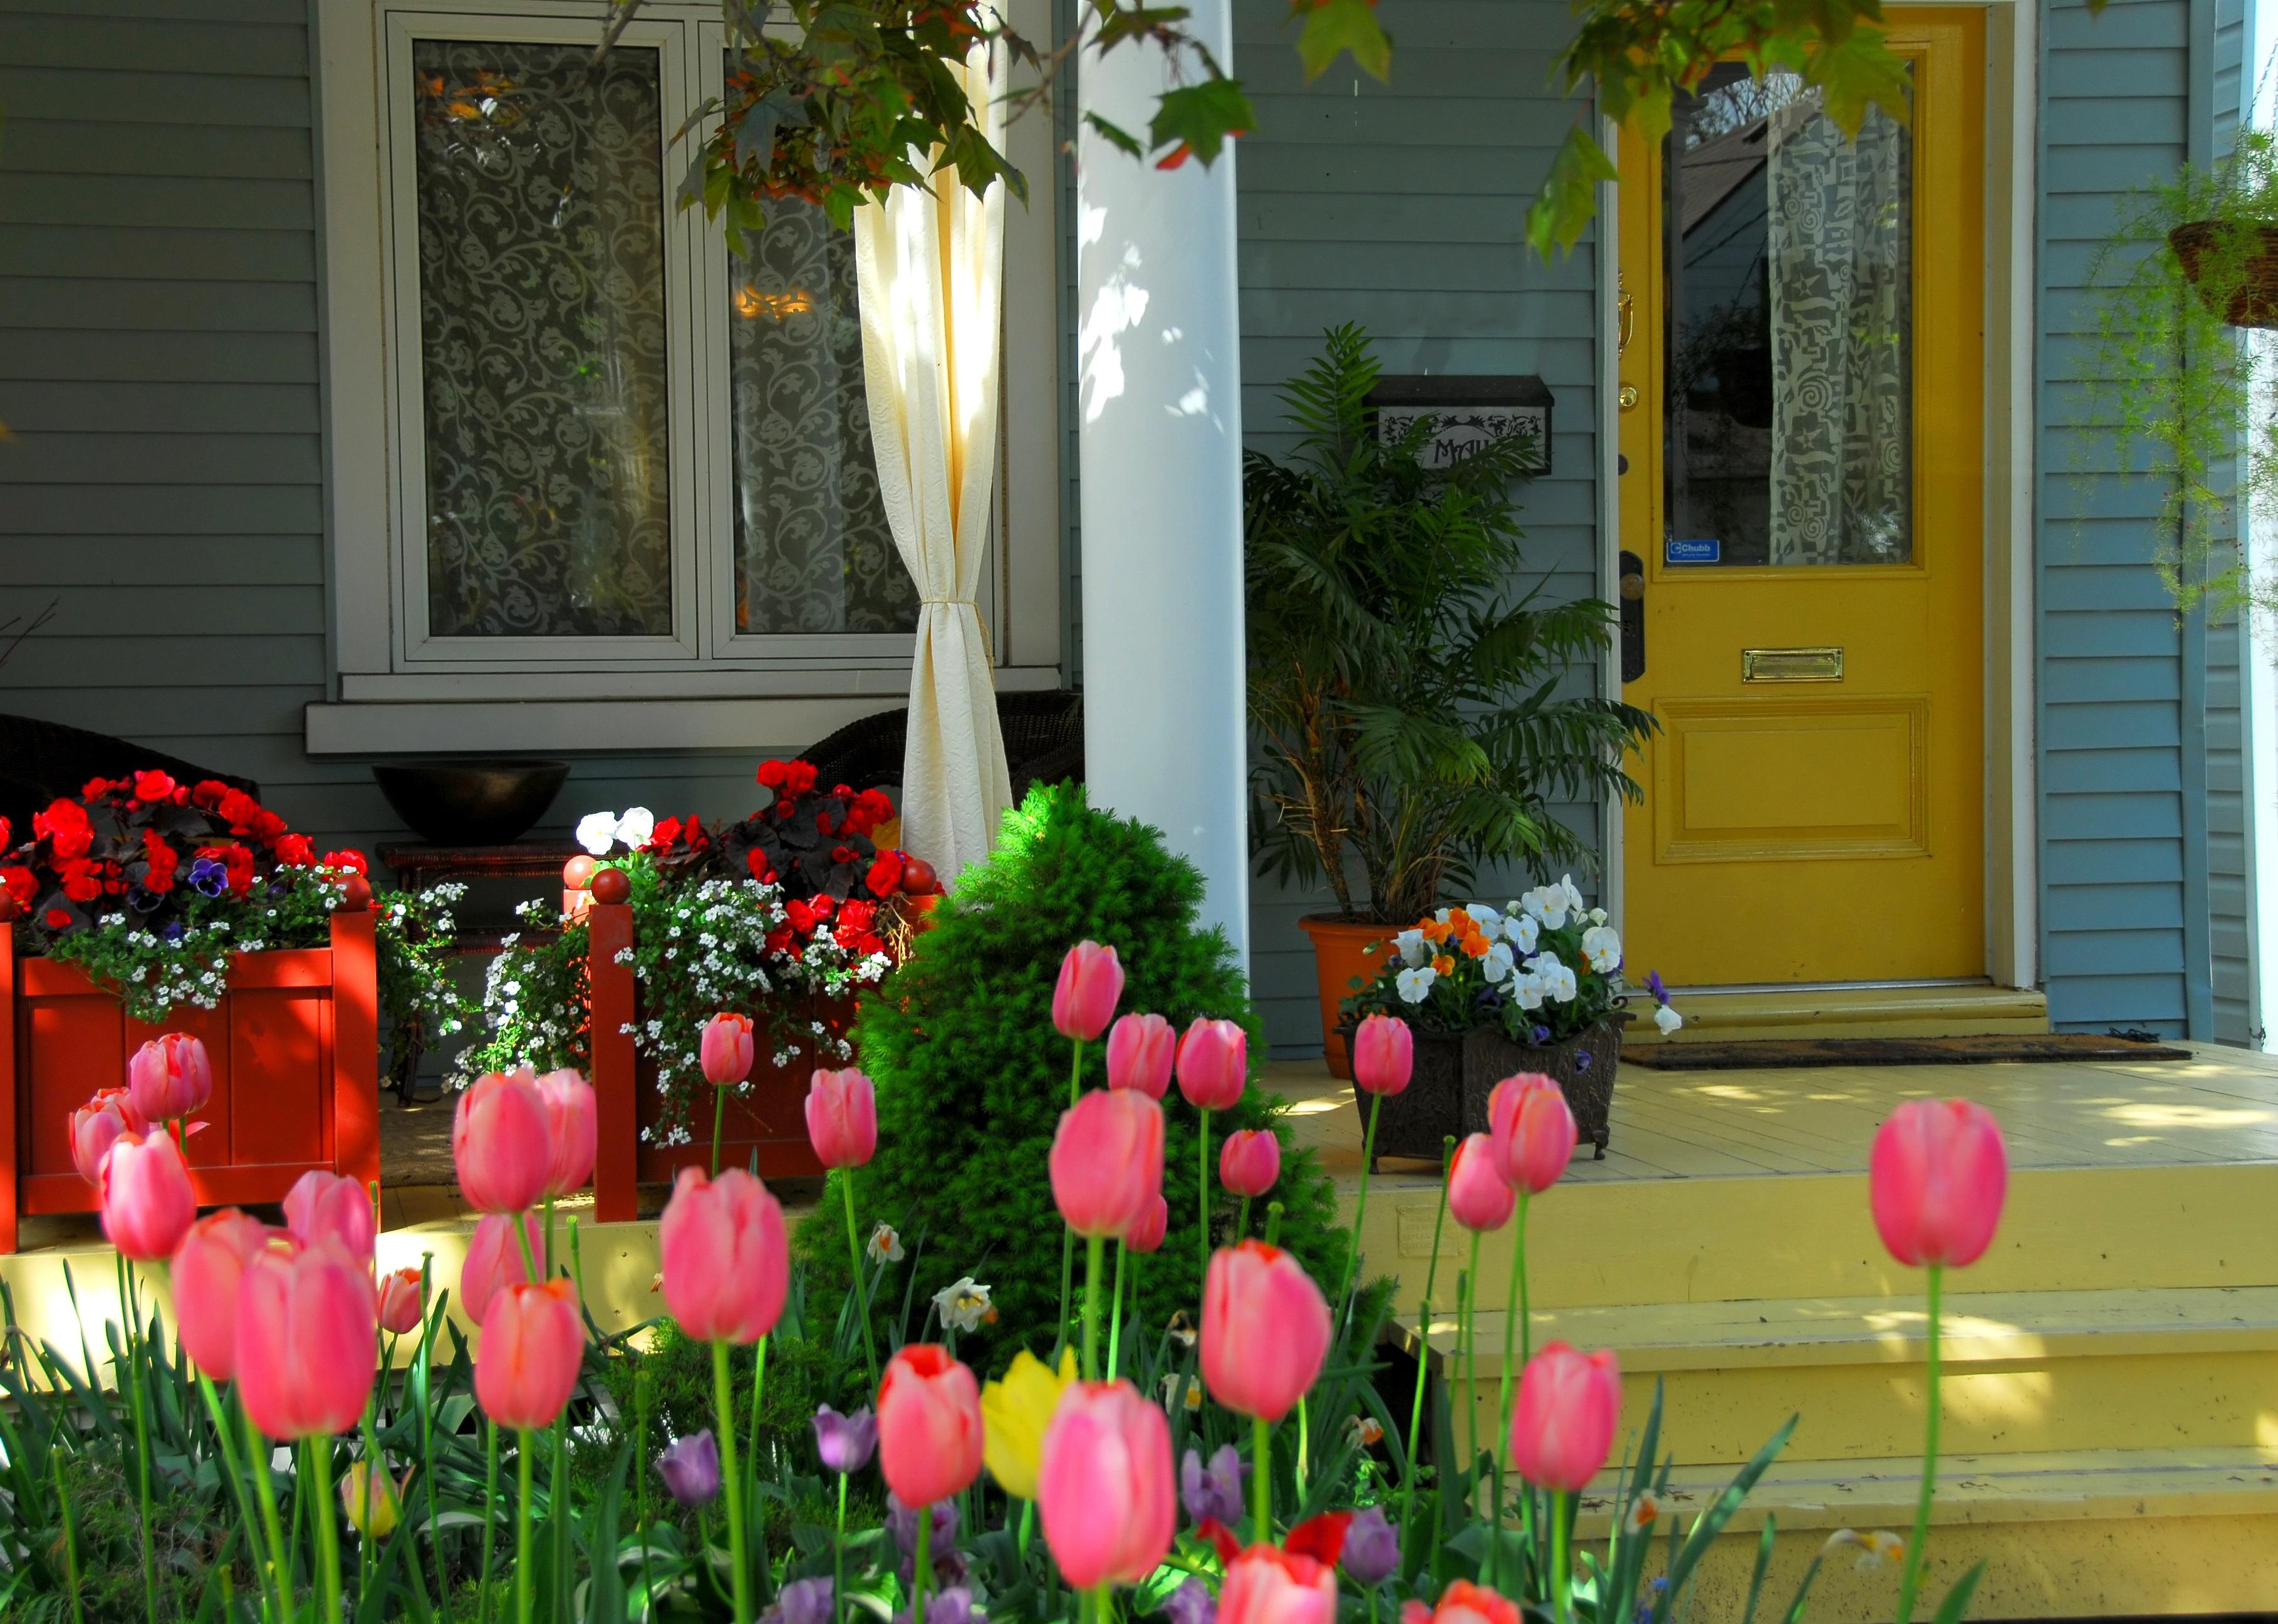 A home with a yellow door and blooming flowers in front.